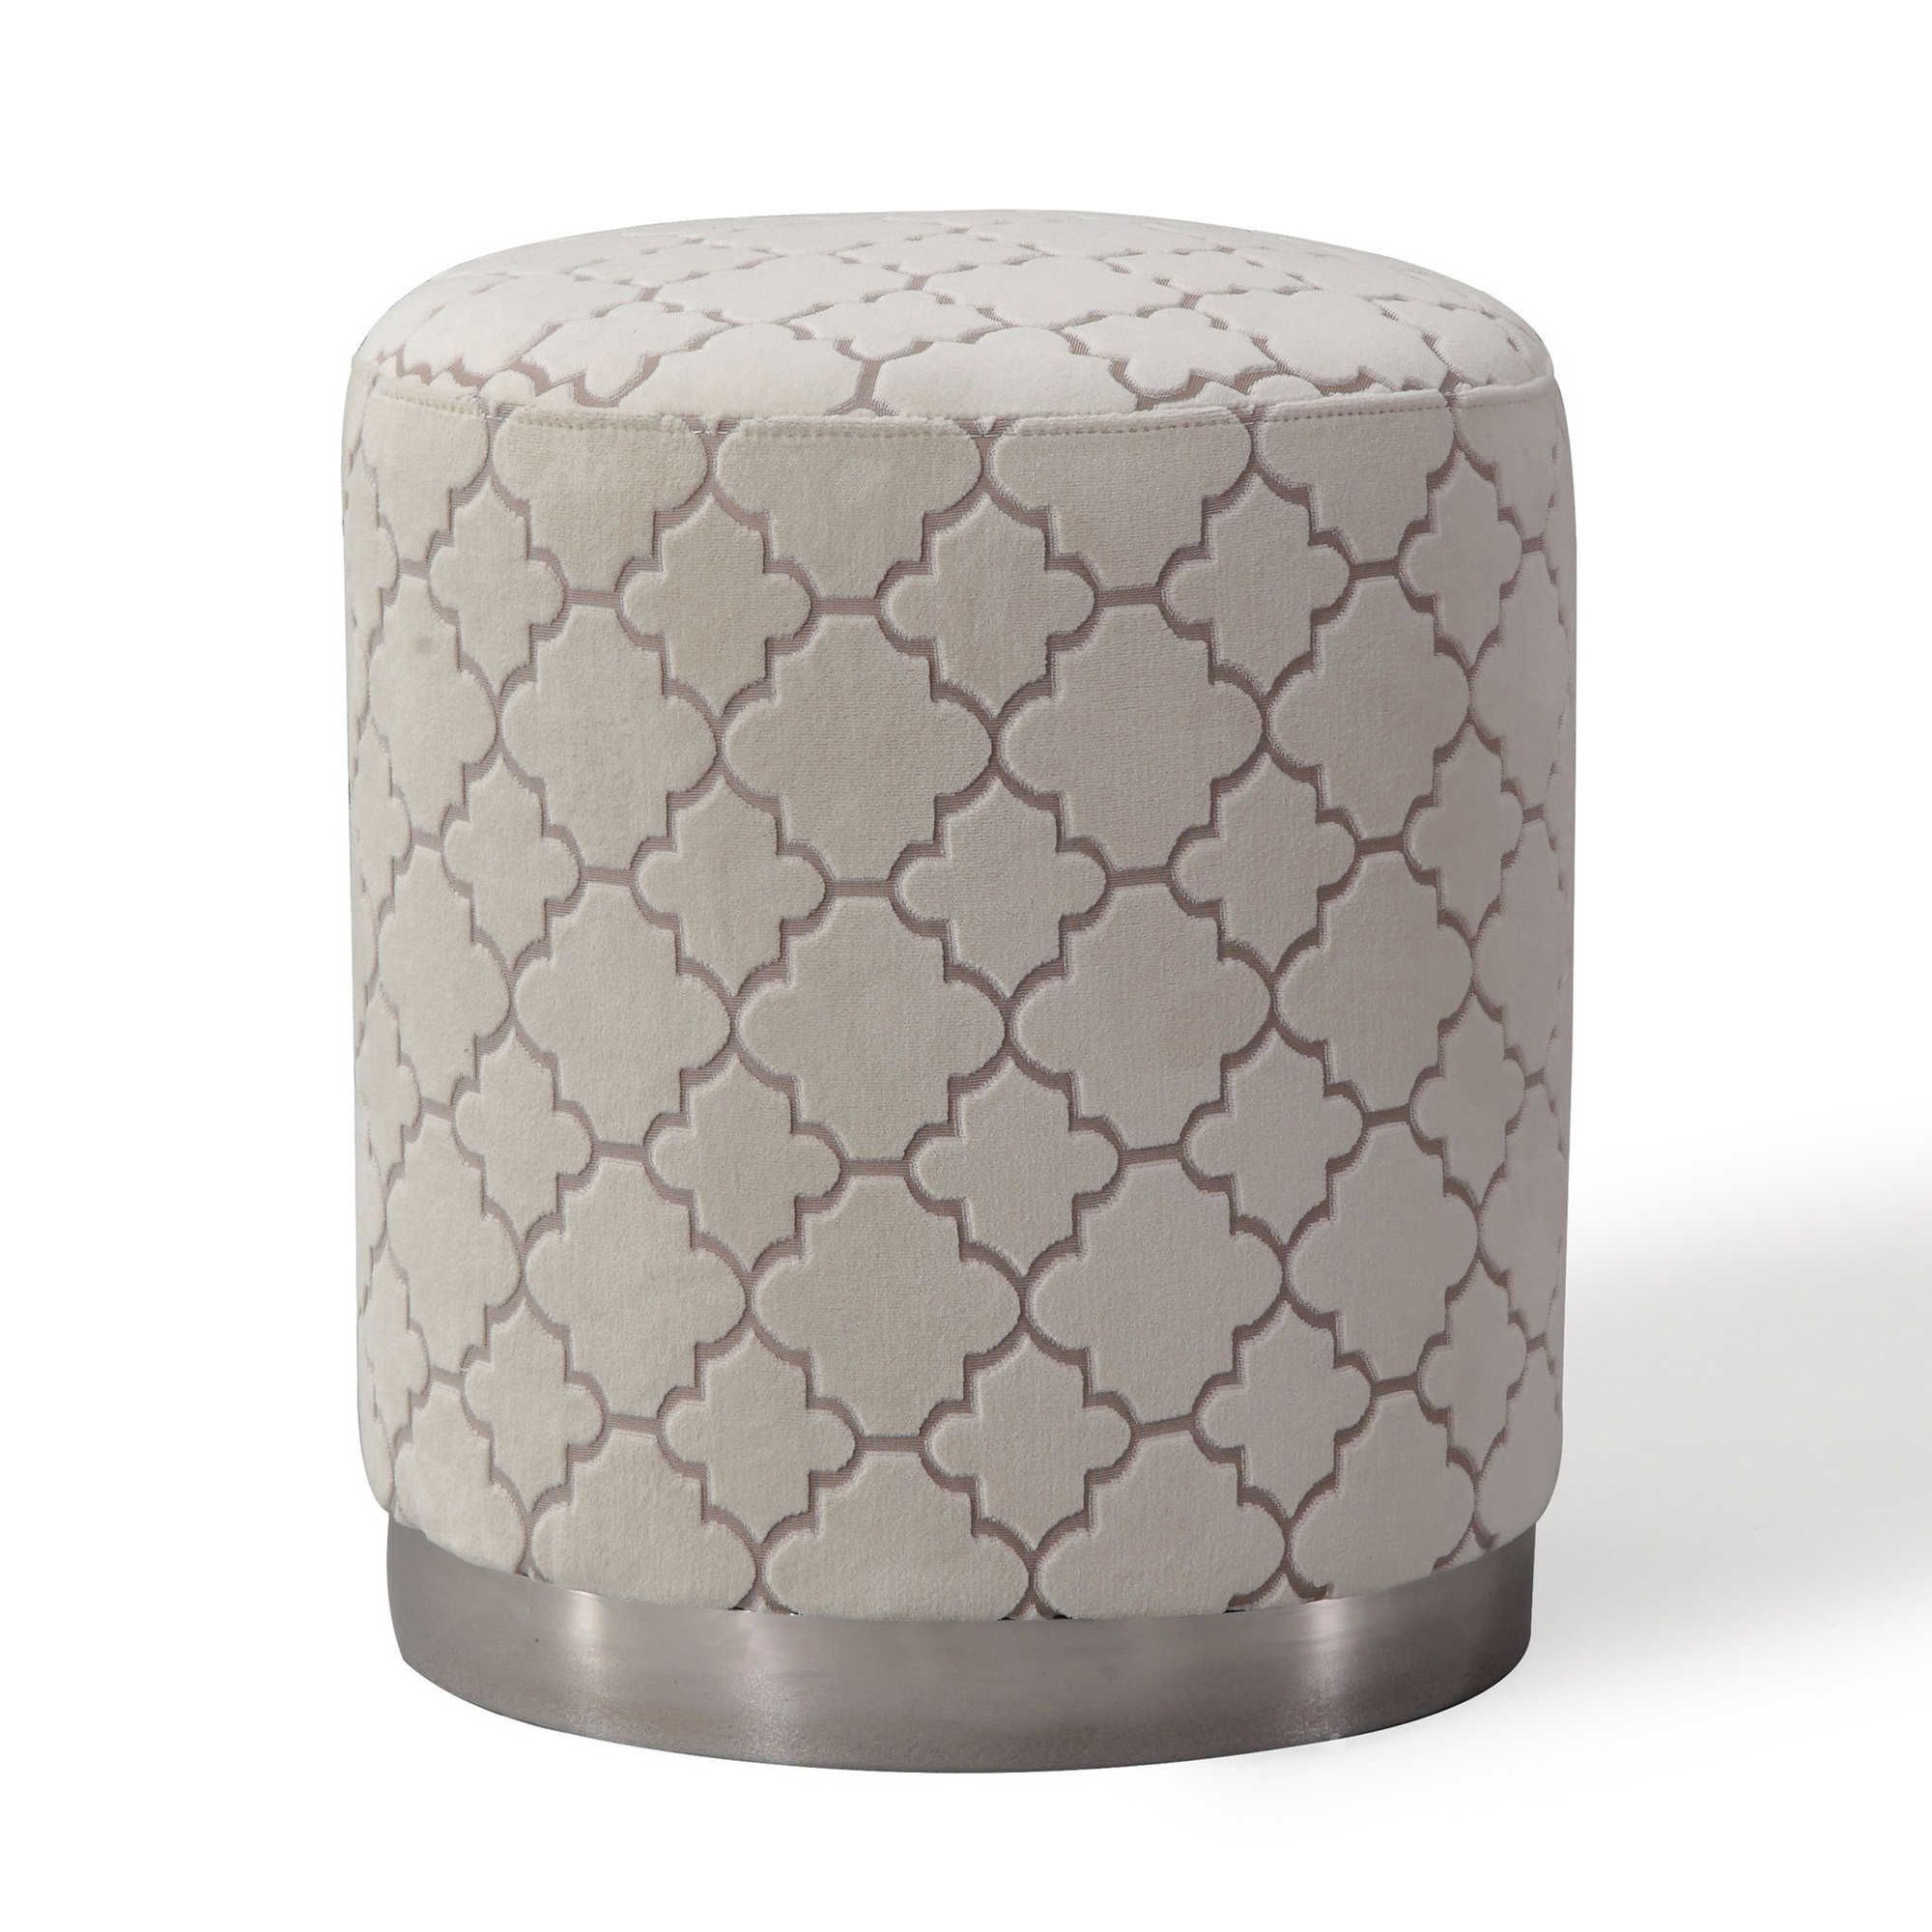 Tov Furniture Moroccan Opal Ottoman In Cream | Bed Bath & Beyond Within Round Cream Tasseled Ottomans (View 18 of 20)